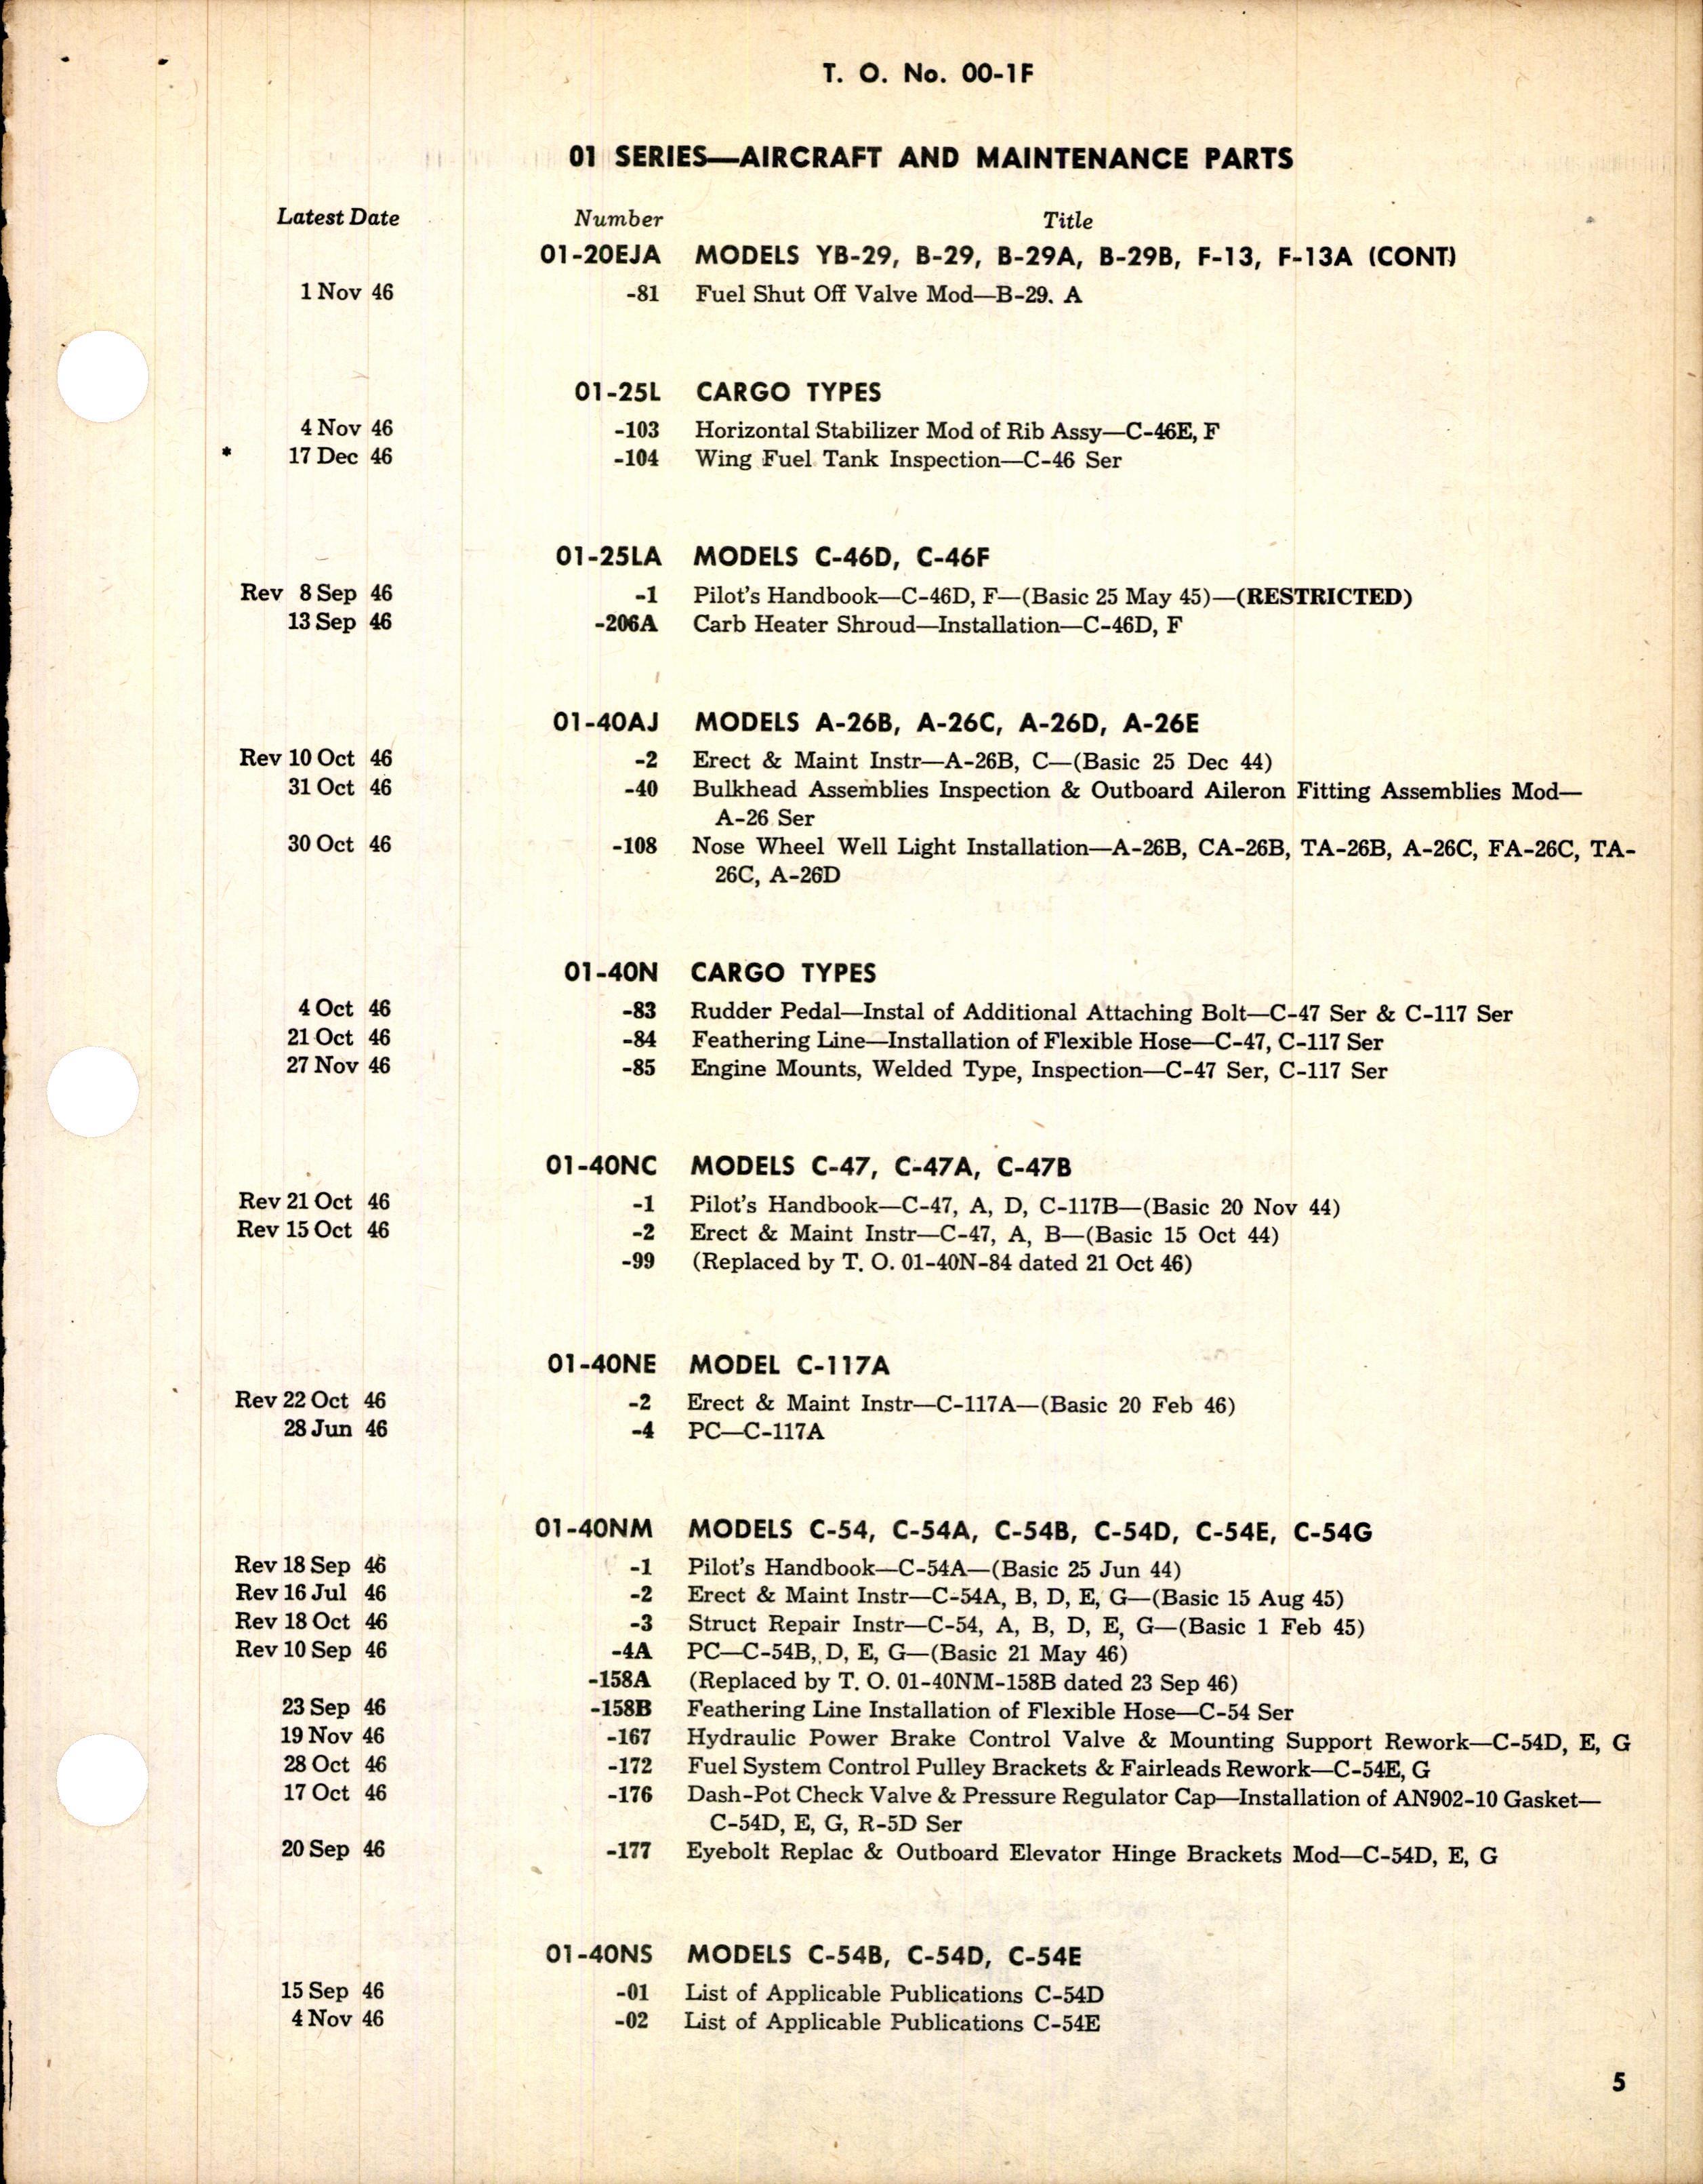 Sample page 5 from AirCorps Library document: Numerical Index of Technical Publications